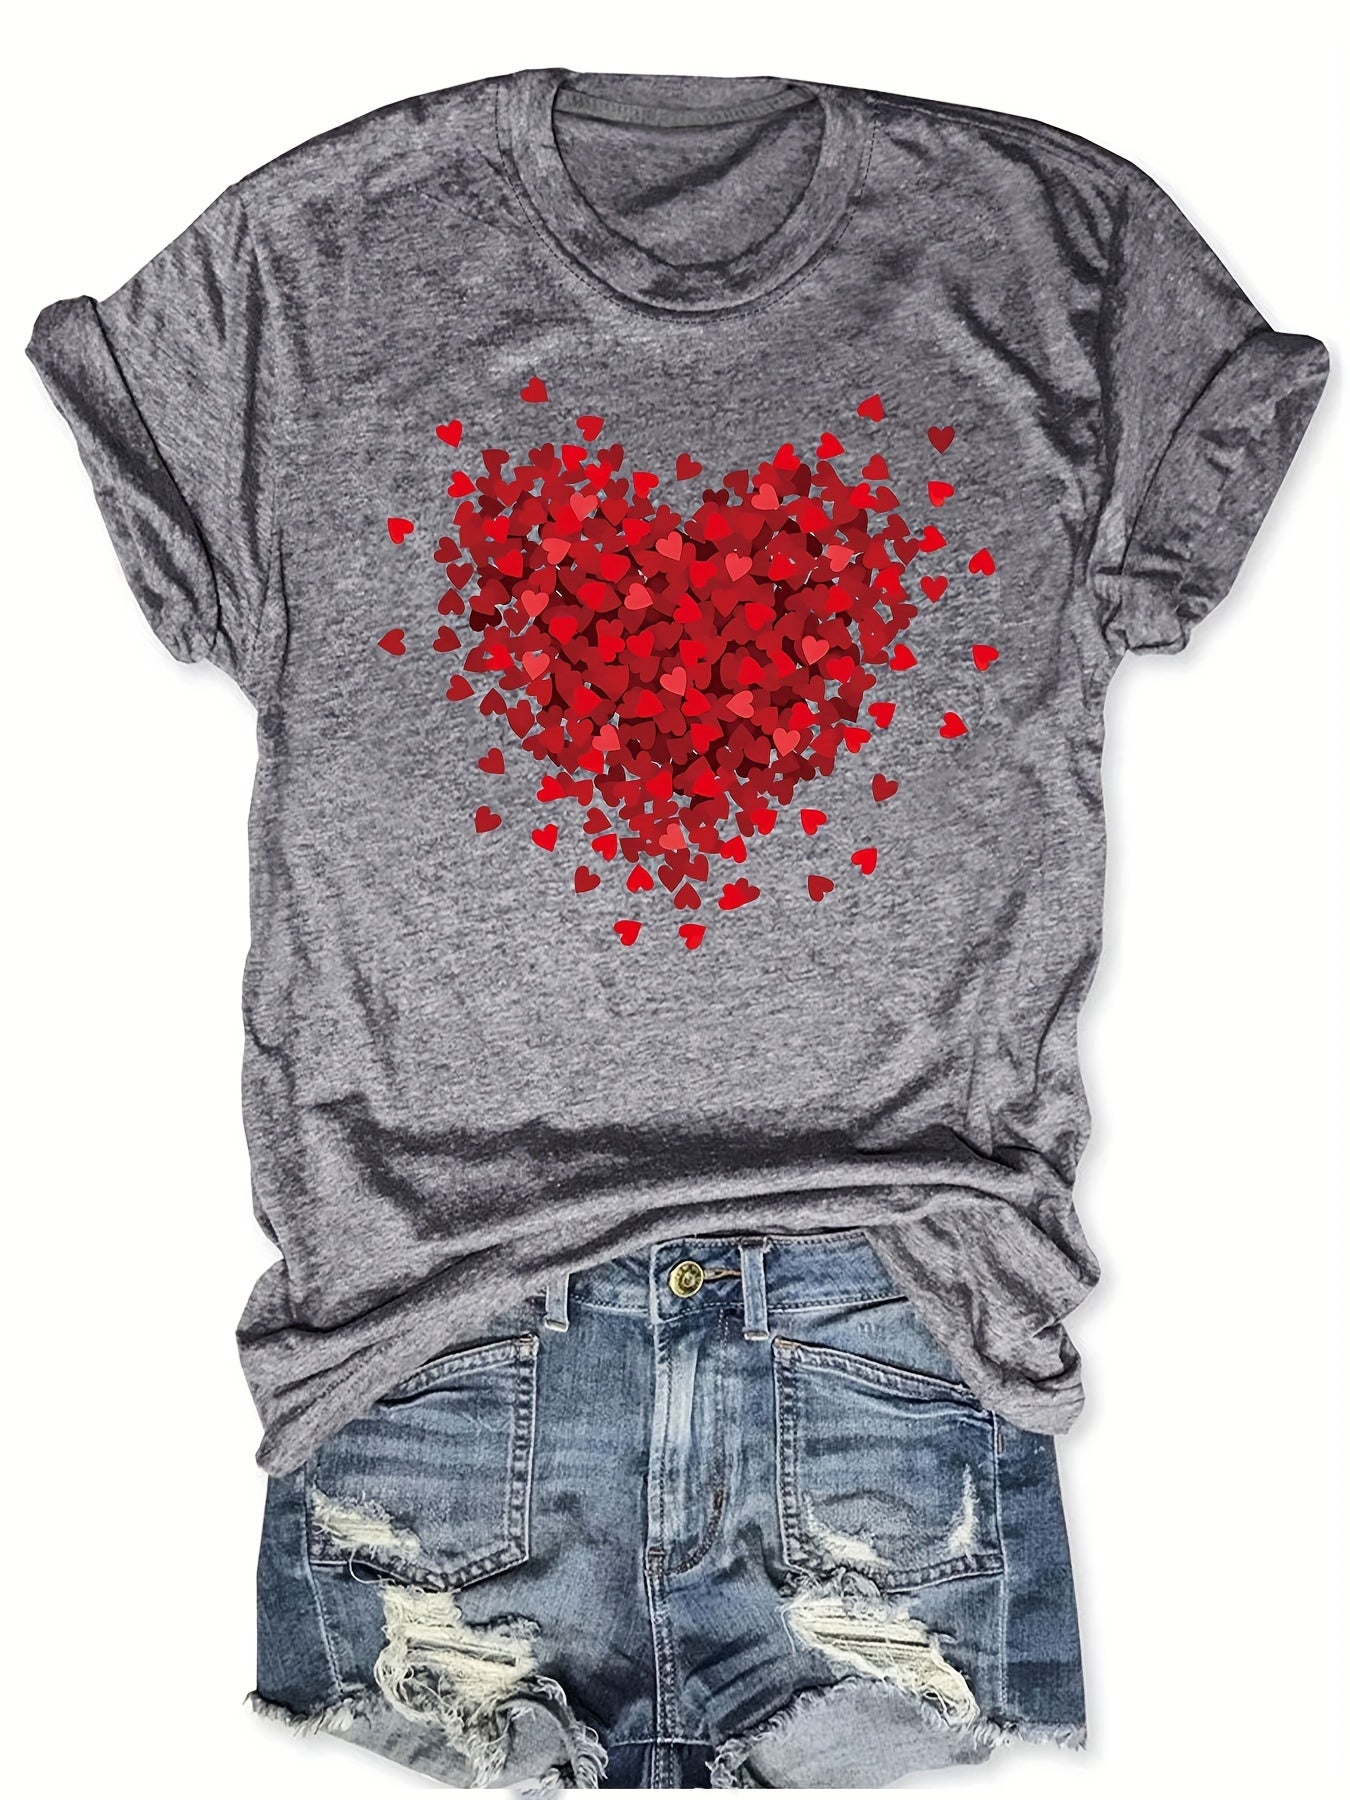 Valentine's Day Heart Print T-Shirt, Casual Crew Neck Short Sleeve Top